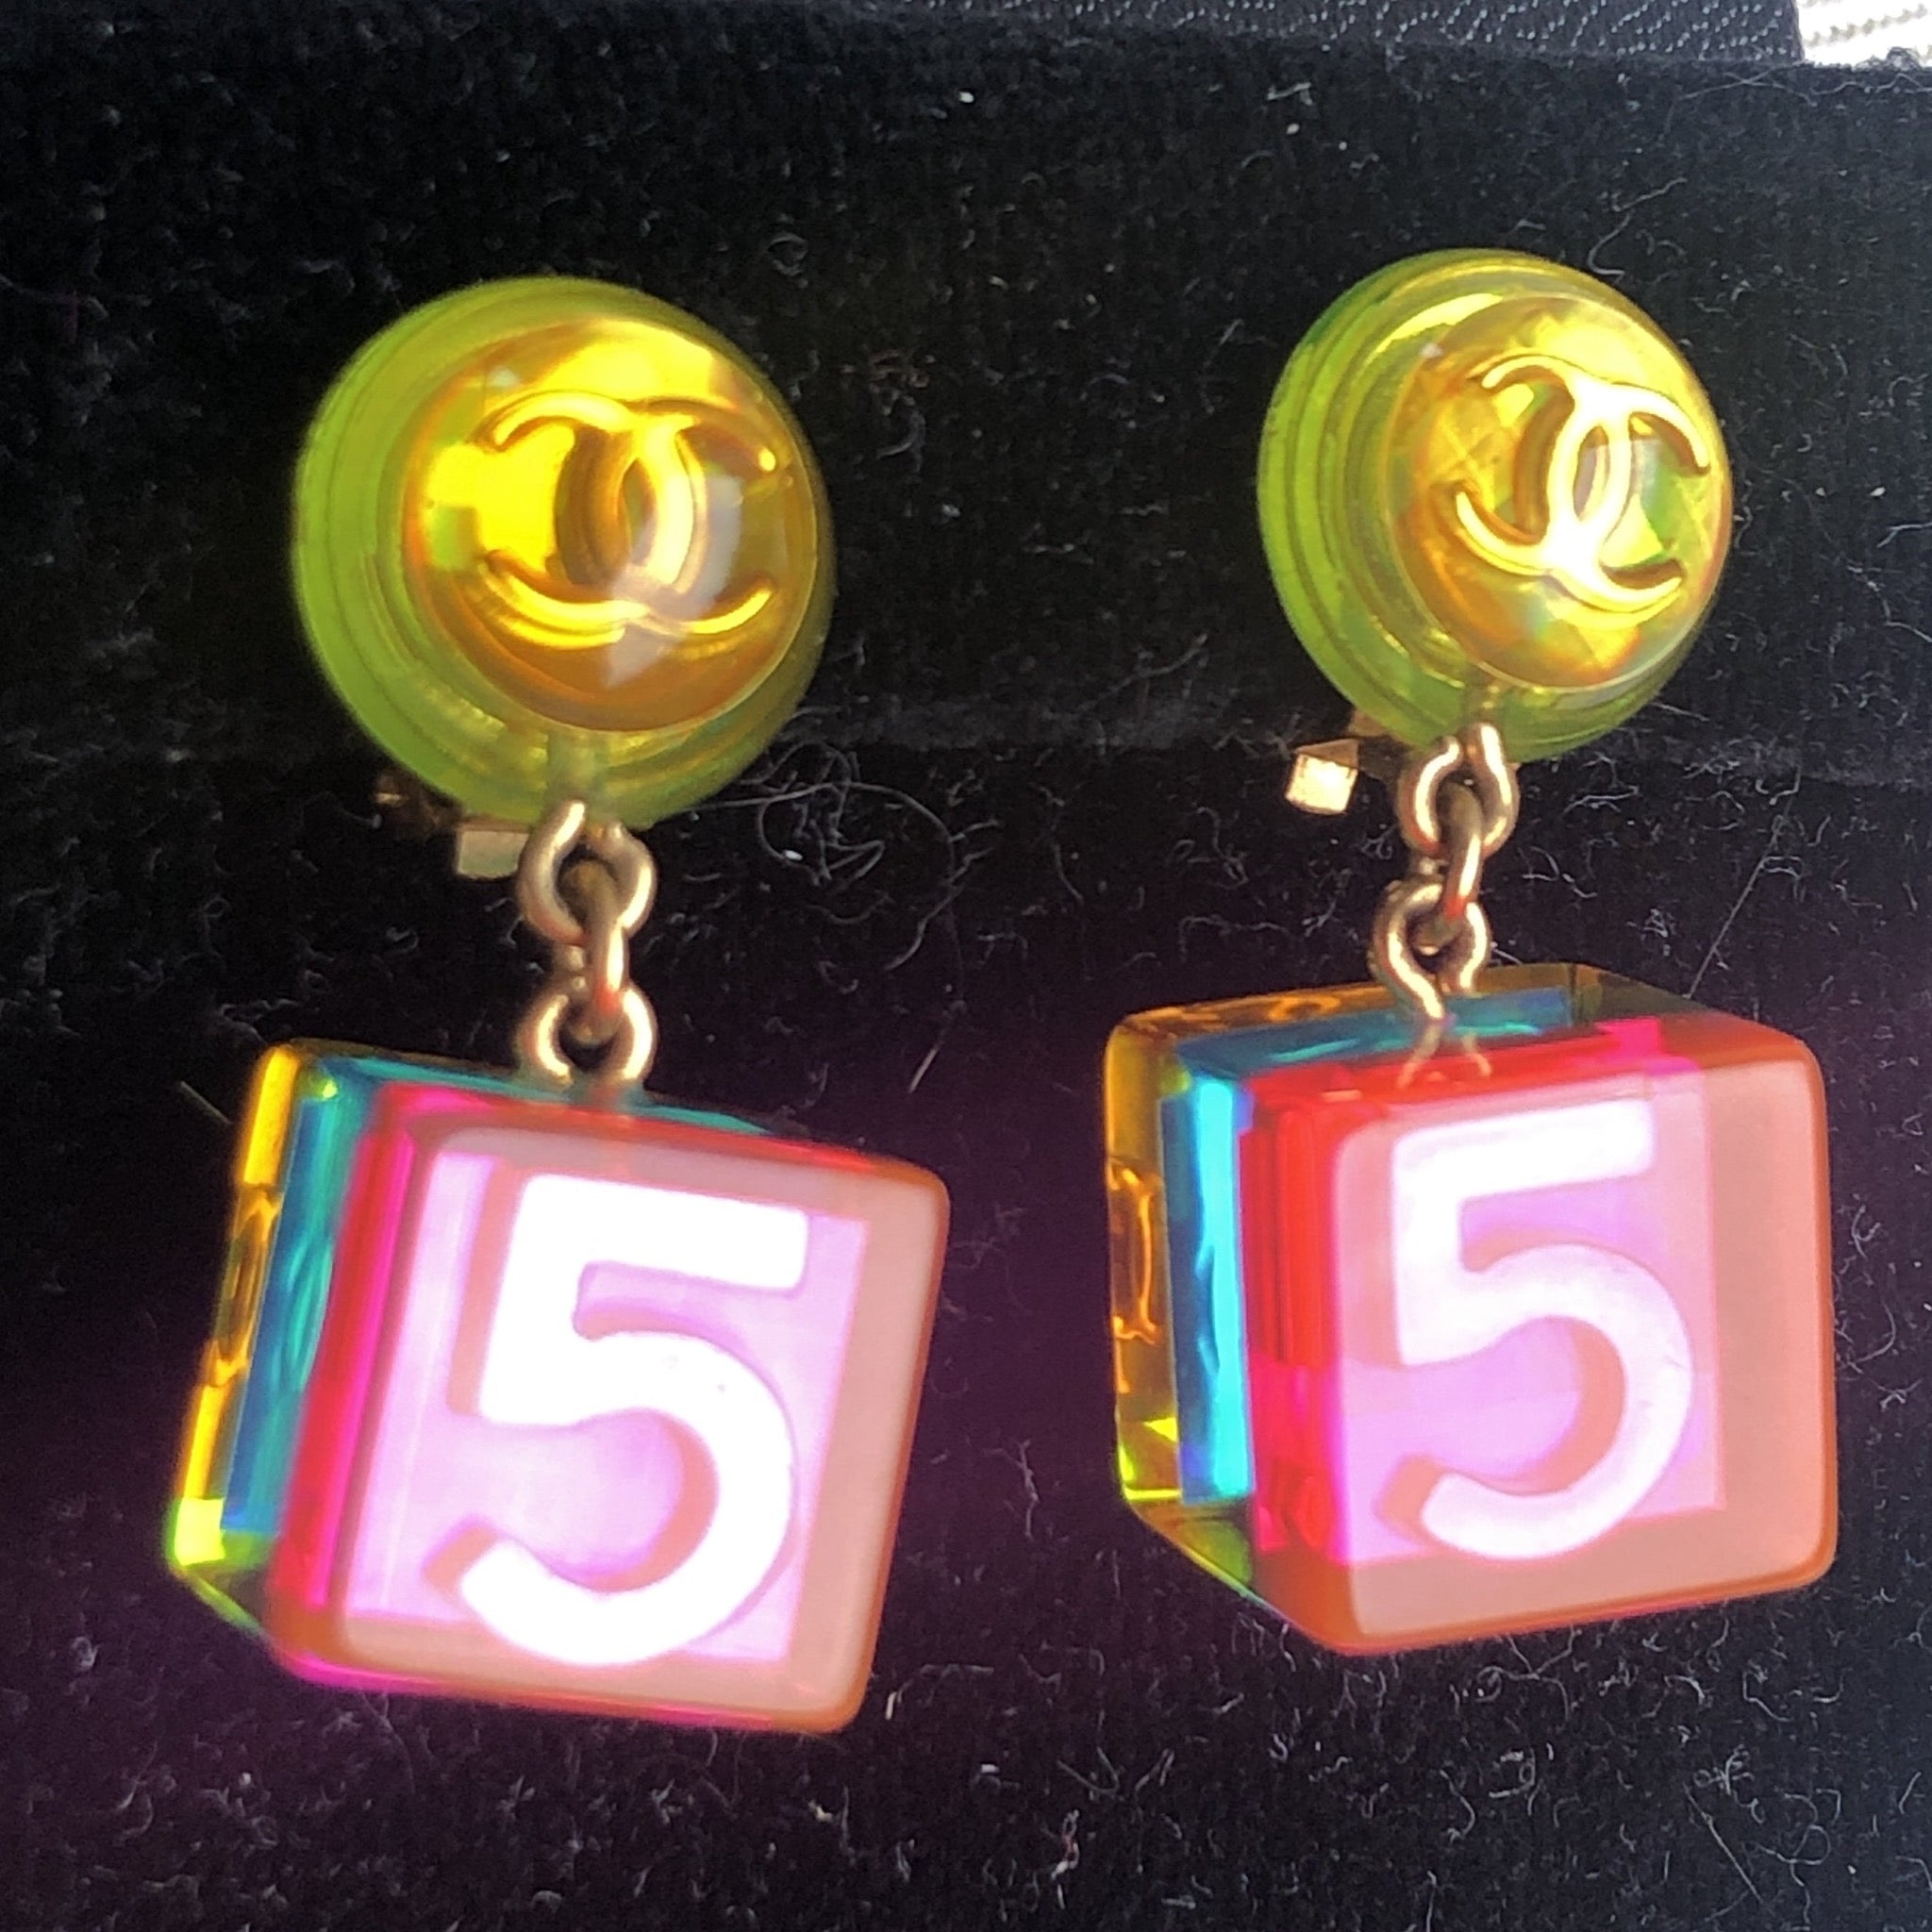 Chanel Pre Owned 1996 Cc Button Clip On Earrings